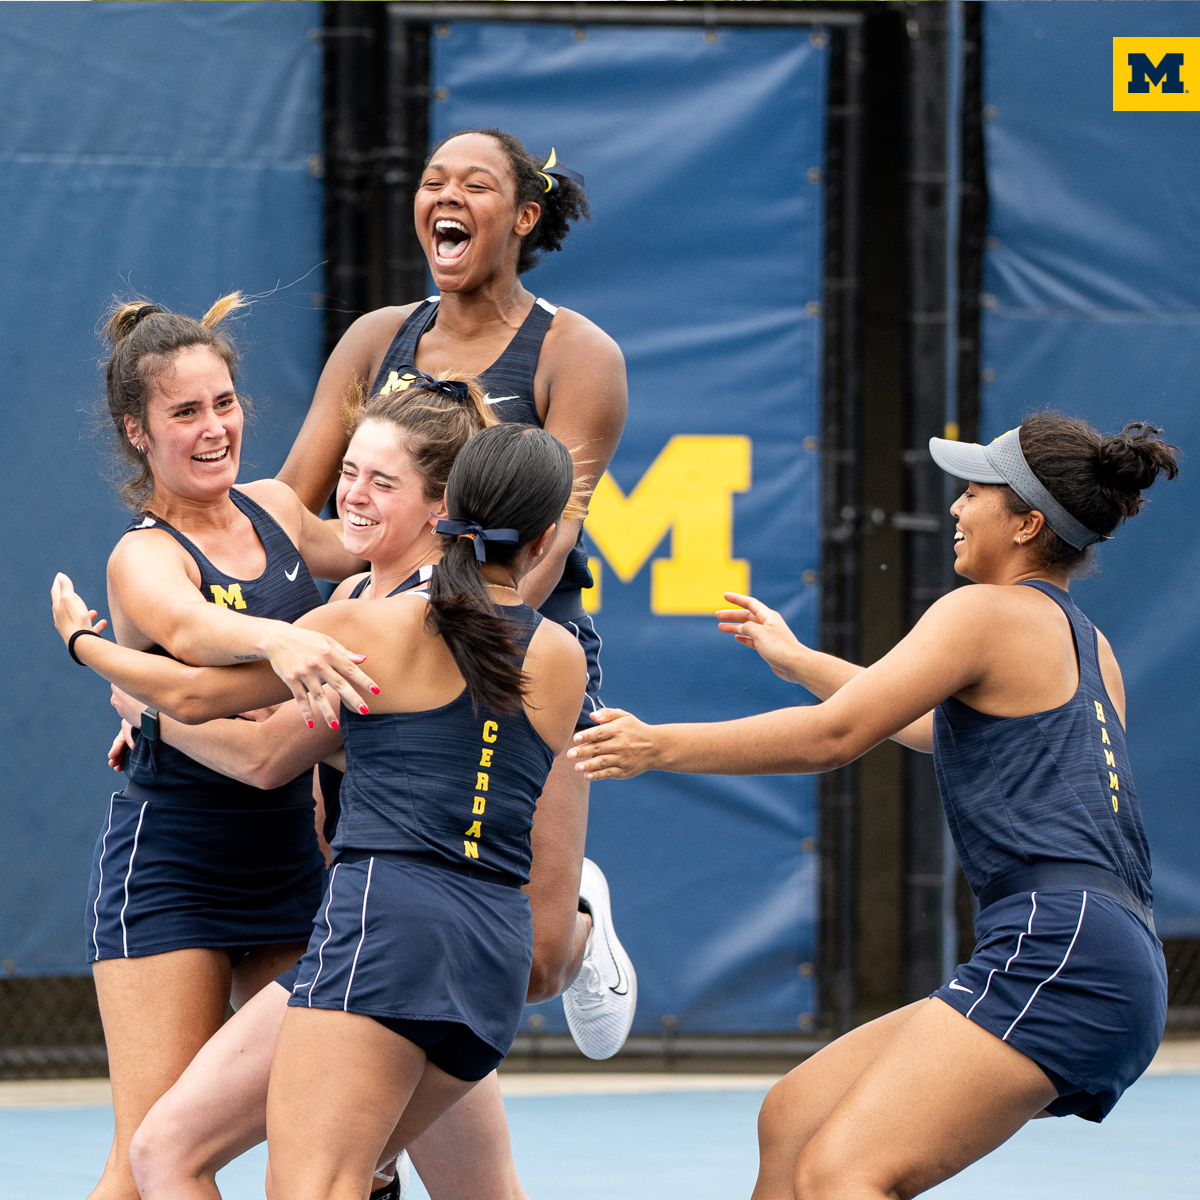 THIS WEEK: The Michigan men's and women's tennis teams are headed to Florida for the NCAA Quarterfinals of the team championship! Let's go! 🔥 #TennisSchool | #GoBlue